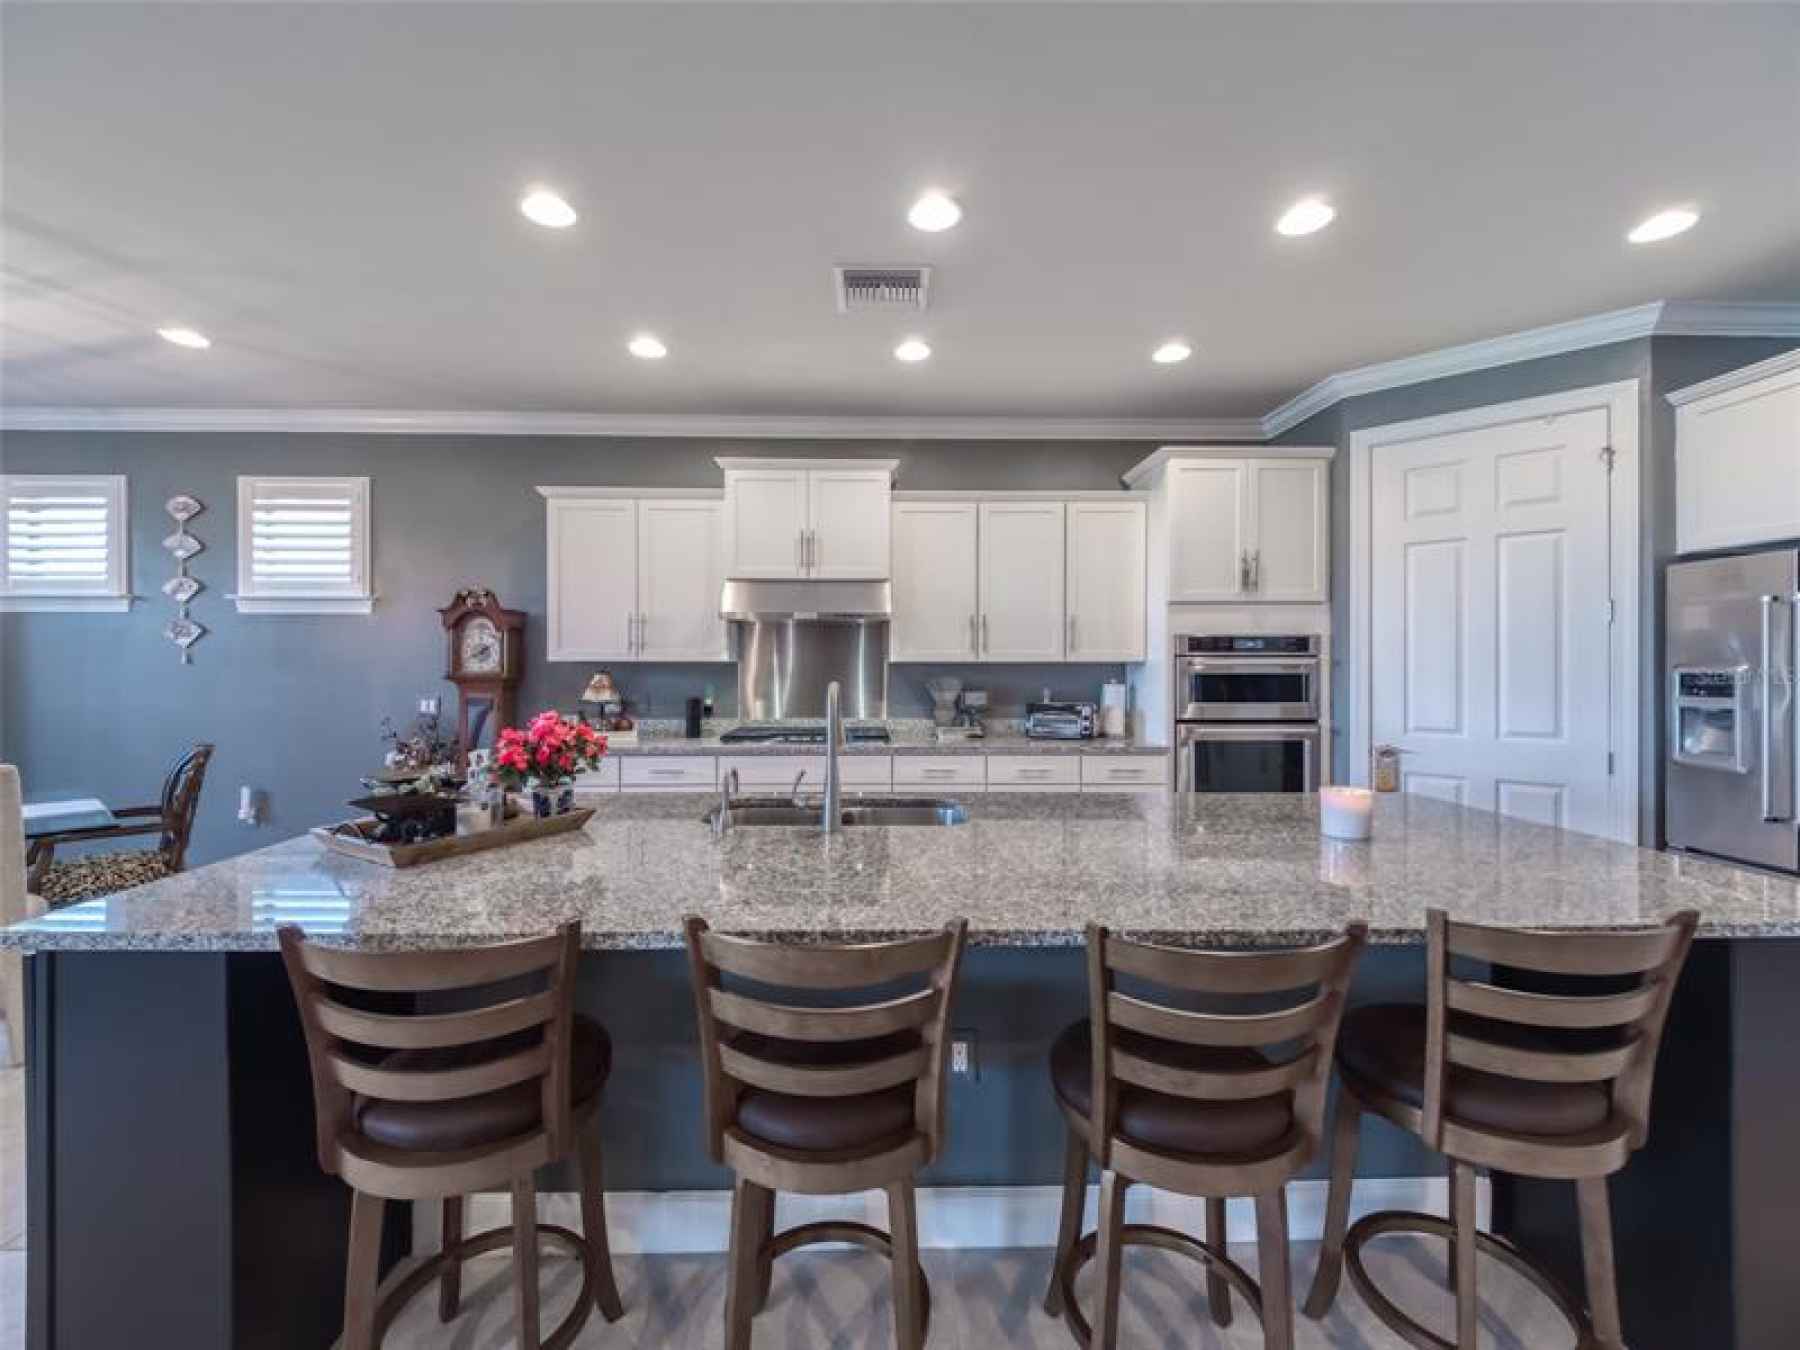 Spacious, Open Kitchen with Large Island Breakfast Bar